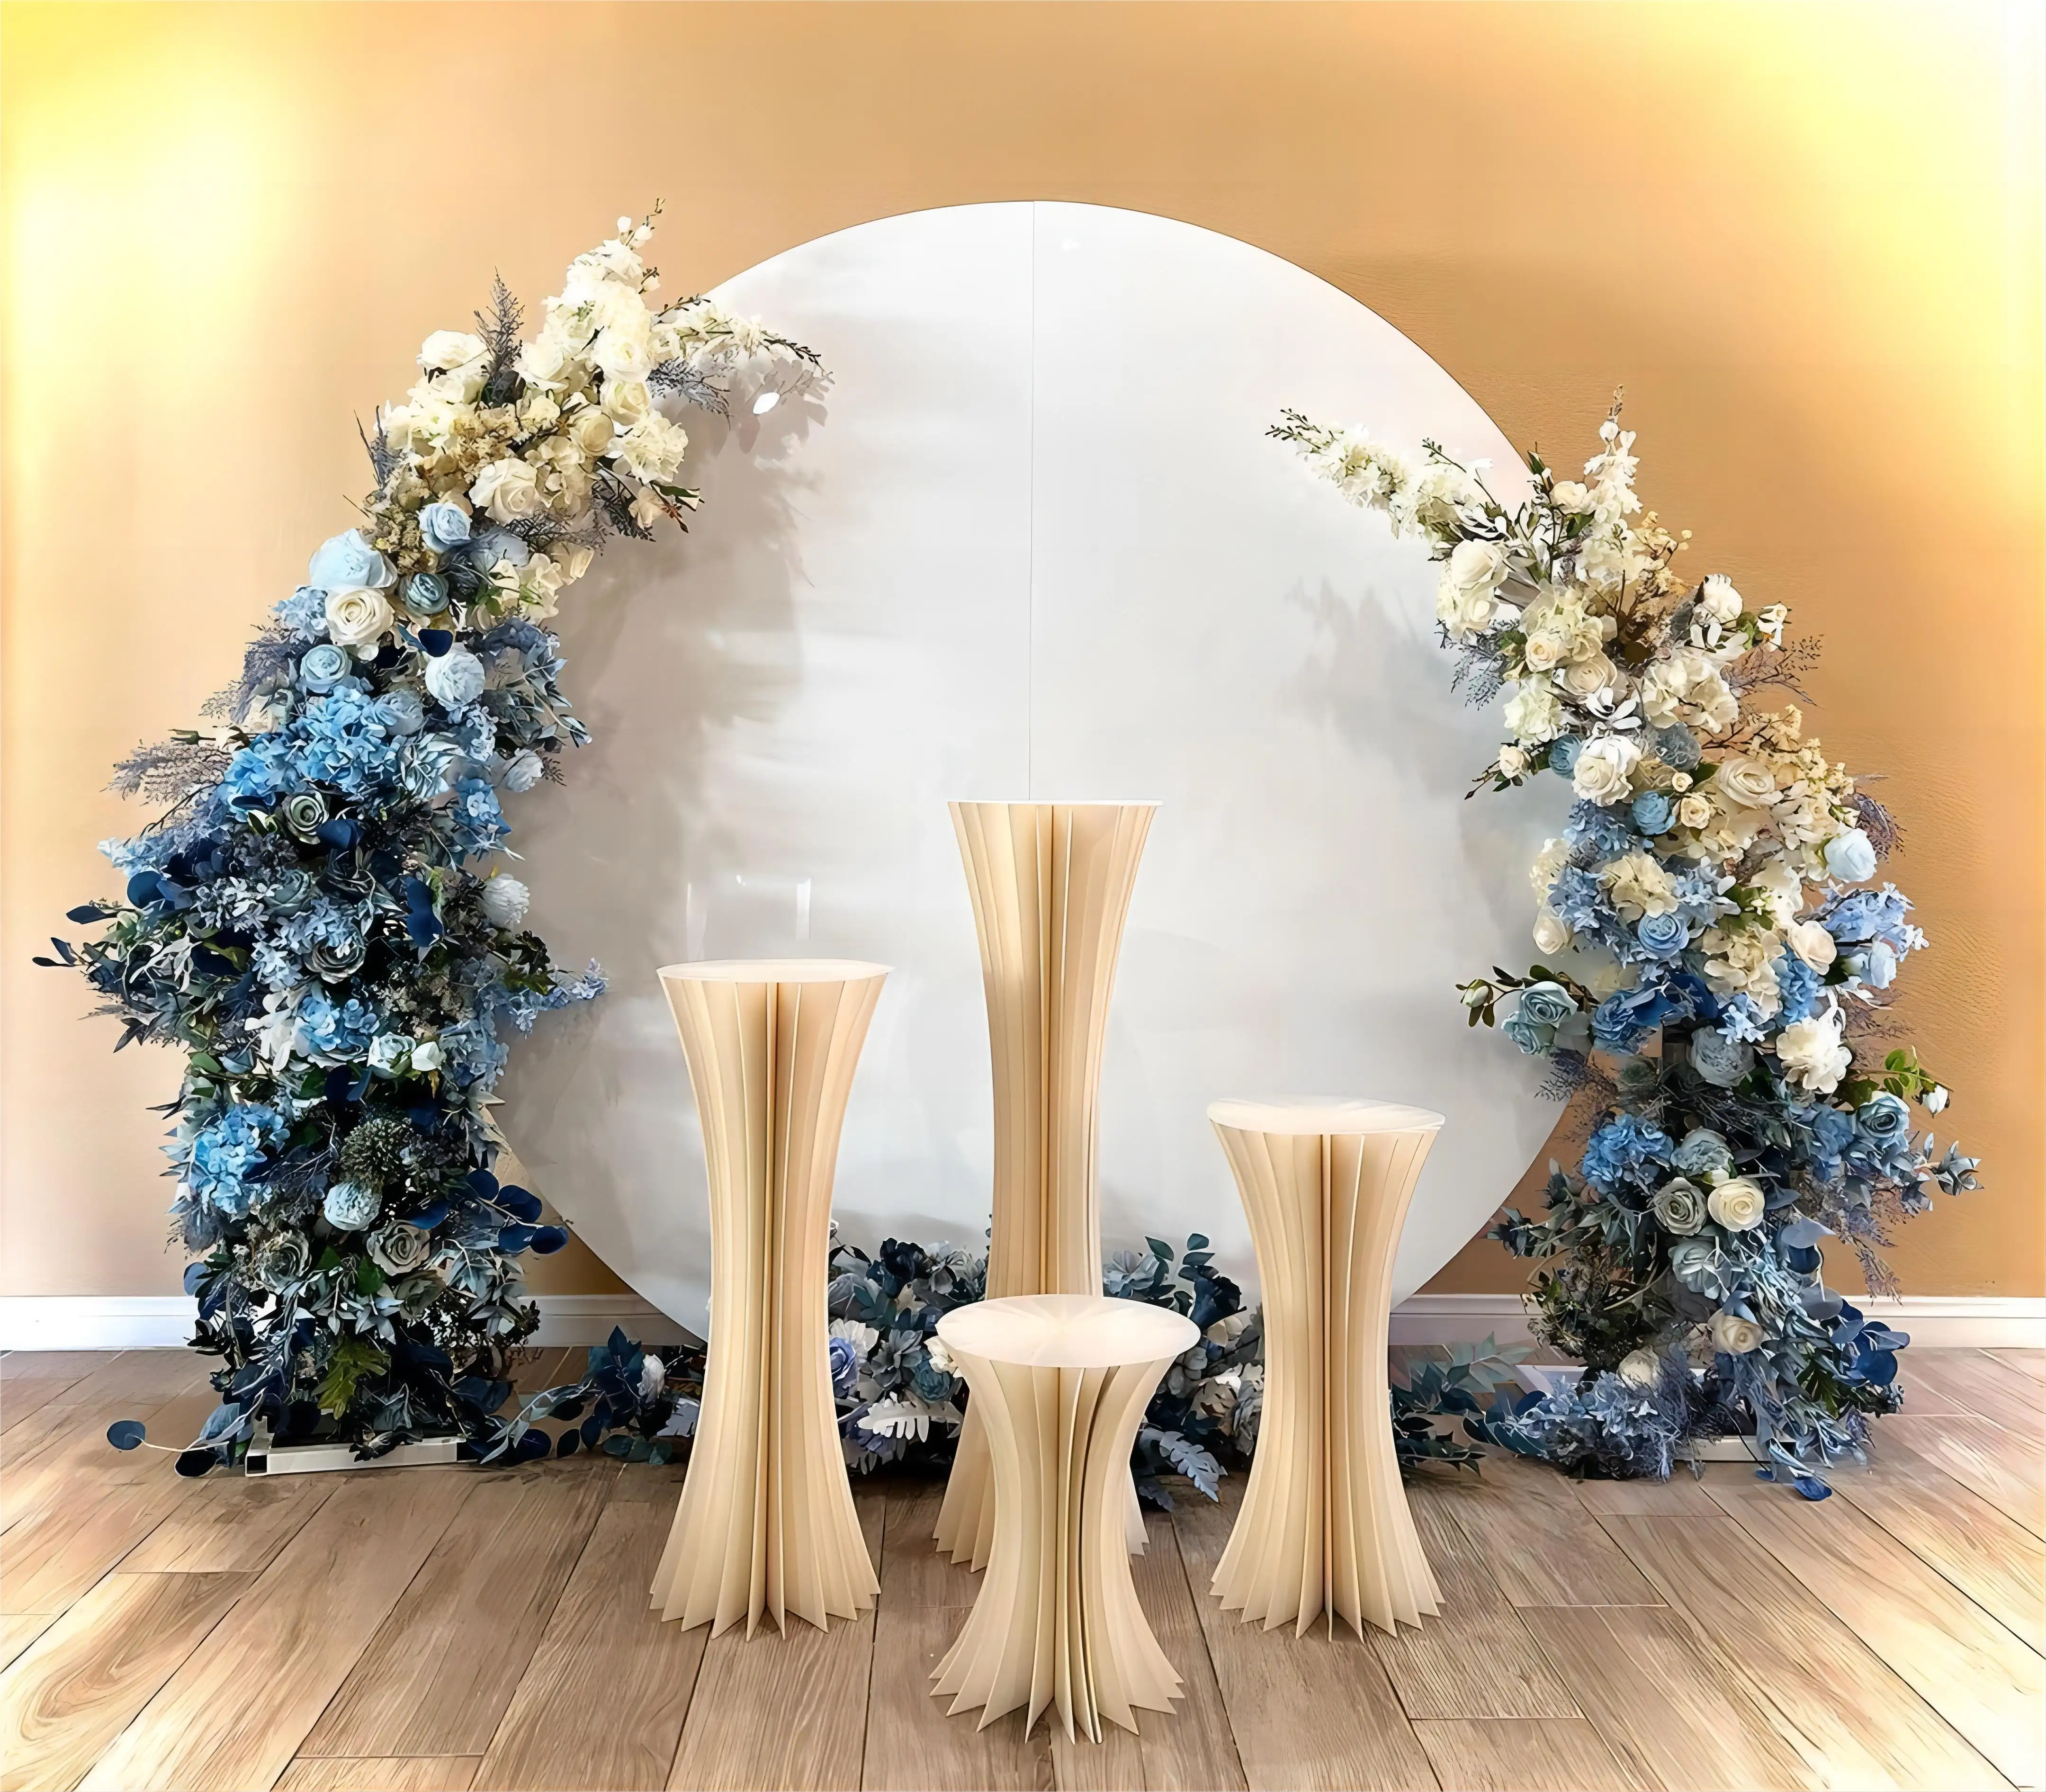 Horn Archery Floral Centerpieces Engagement Wedding and Proposal Decorations Promotional Party Supplies